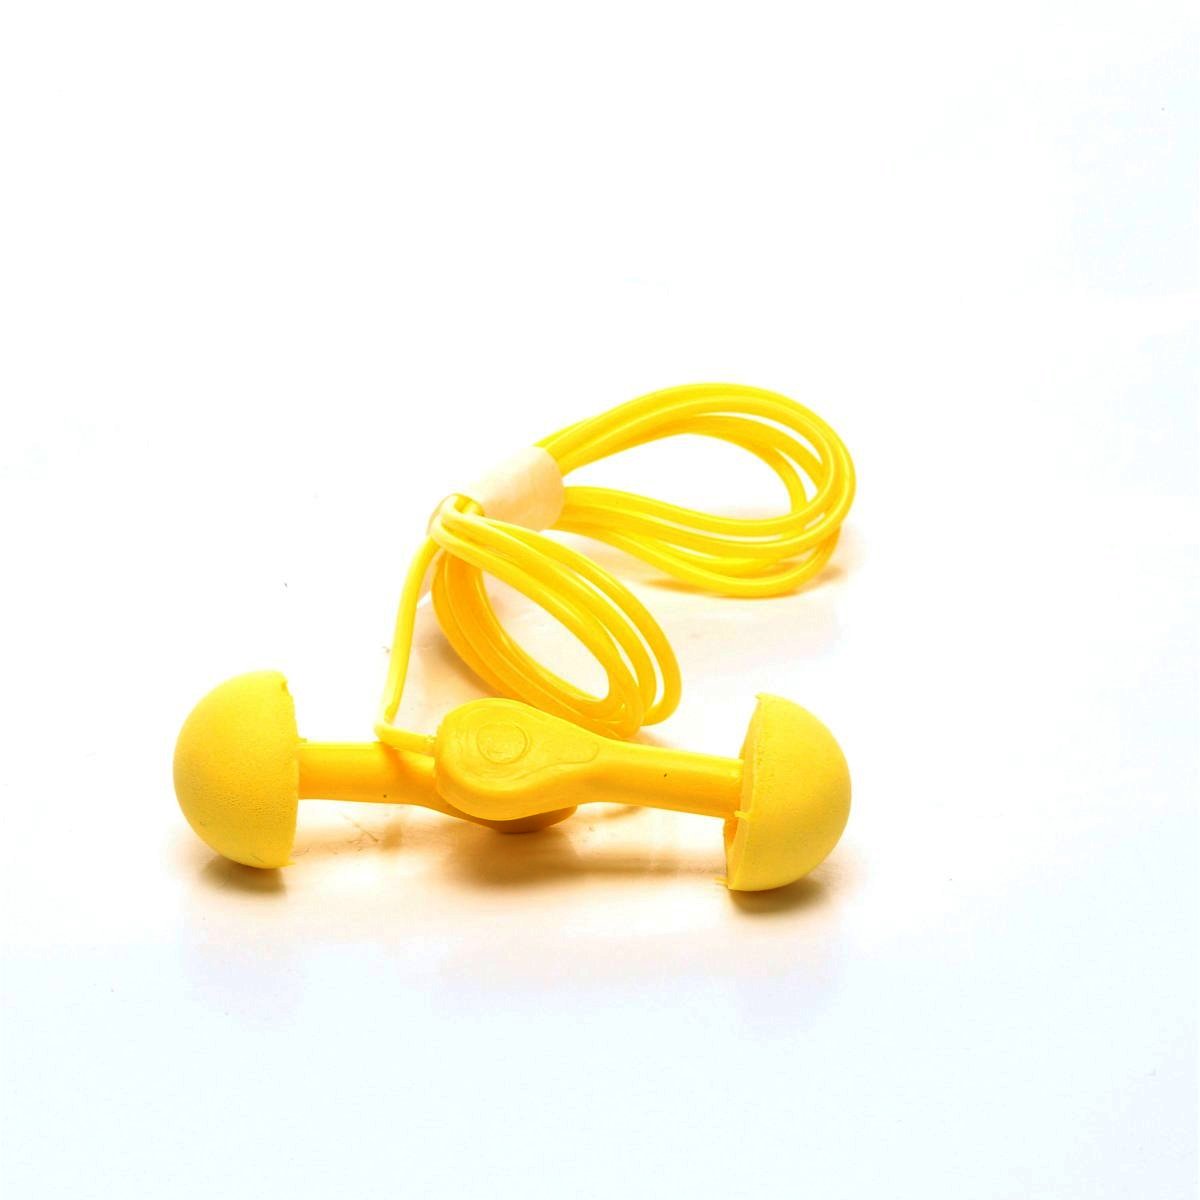 3M™ E-A-R™ EXPRESS™ Pod Plugs™ Earplugs 311-1115, Corded, Assorted ColorGrips, Pillow Pack